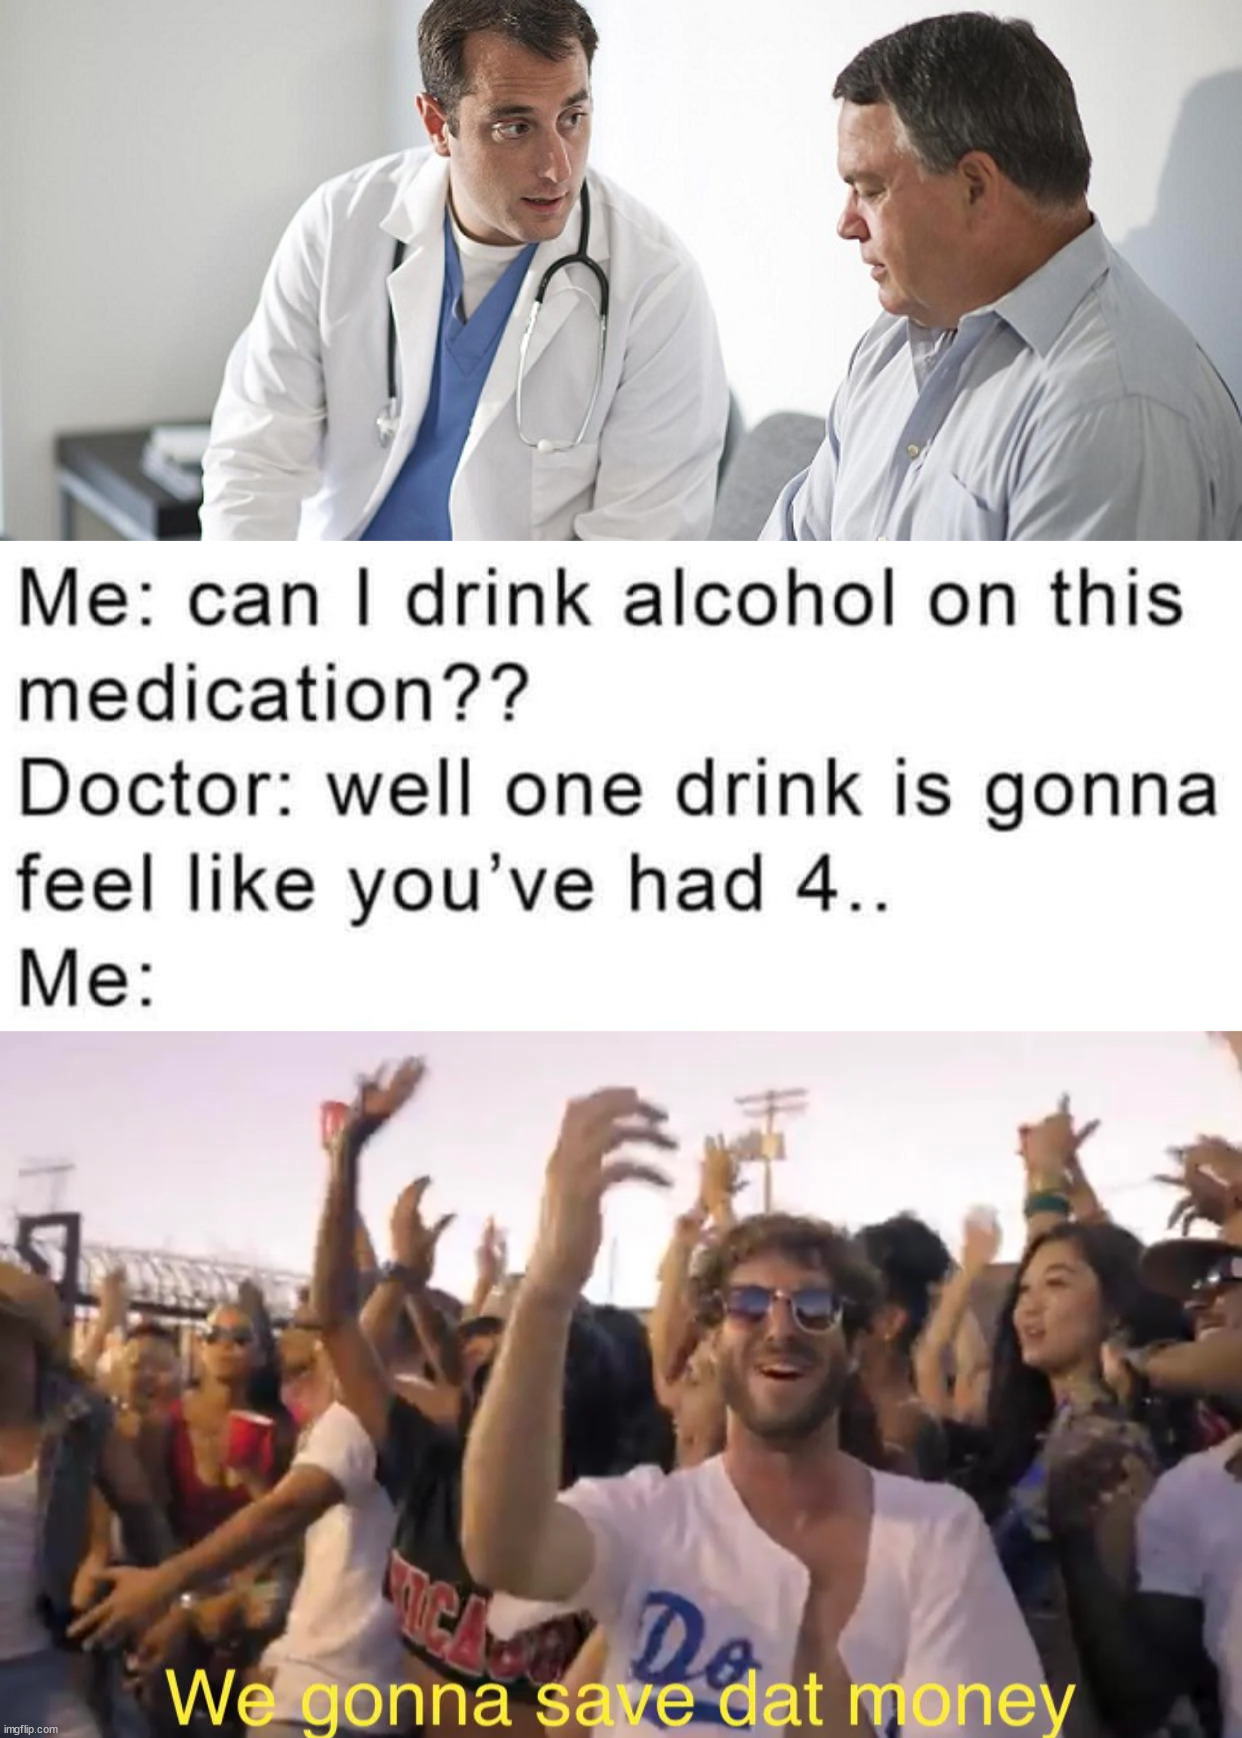 Look I am saving money here | image tagged in doctor and patient,lil dickey save dat money,drinking,drugs,side effects | made w/ Imgflip meme maker